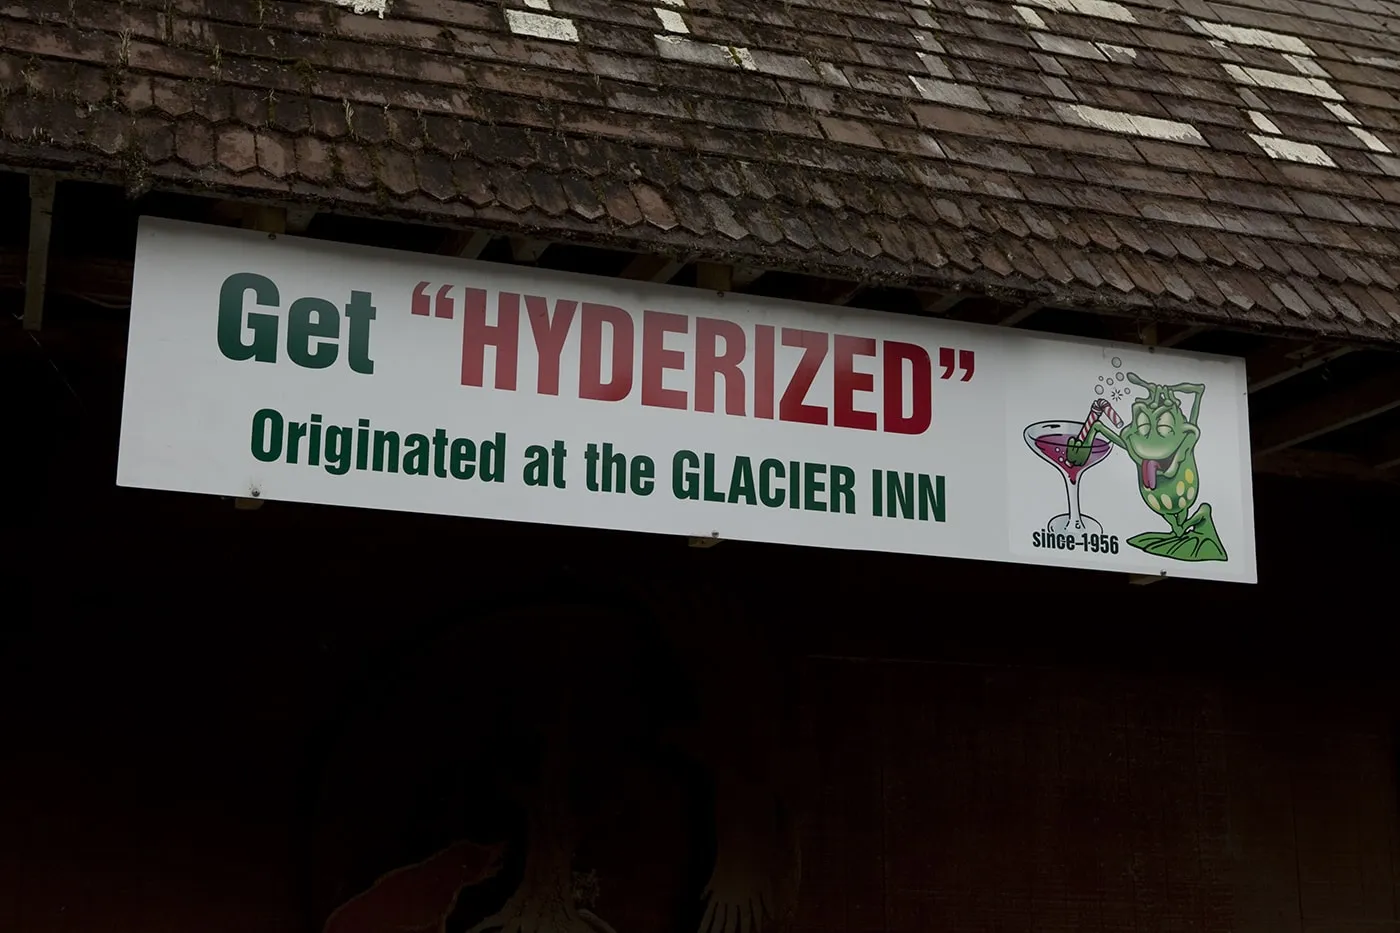 Getting Hyderized at the Glacier Inn, the bar in Hyder, Alaska where it originated